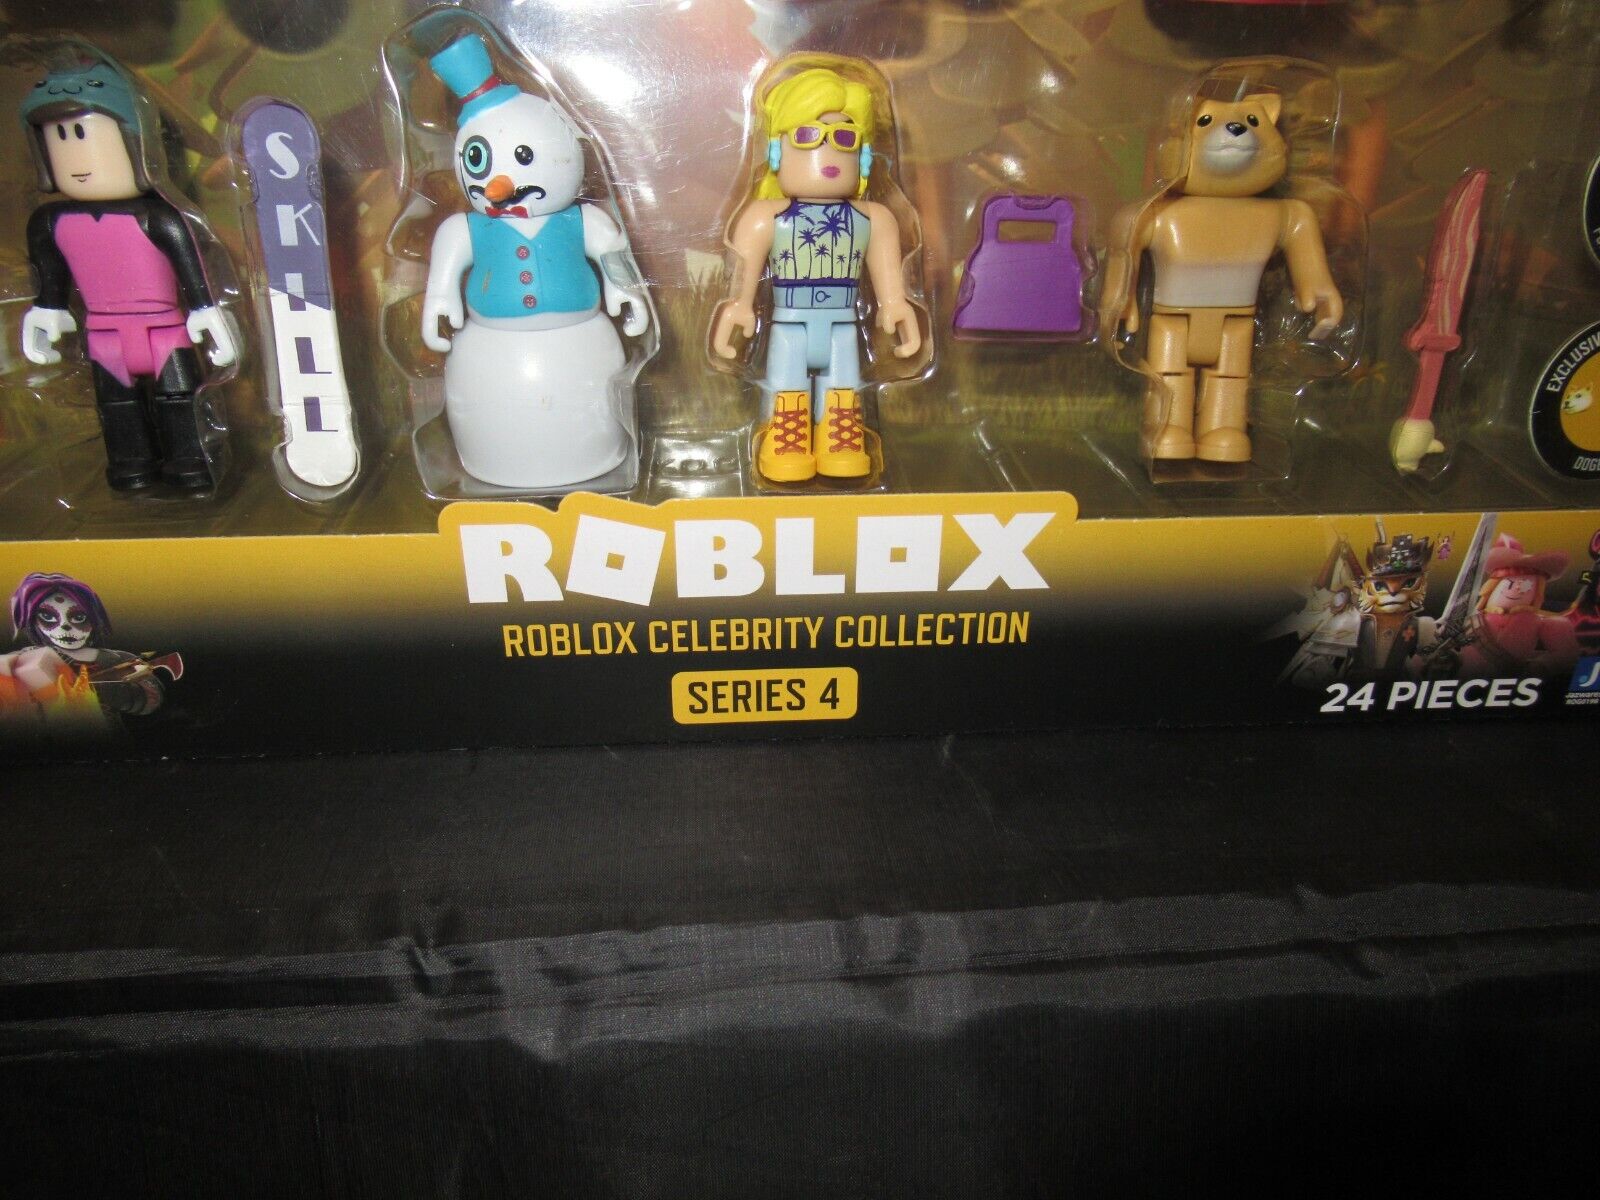 Roblox Celebrity Collection Series 4 24 piece